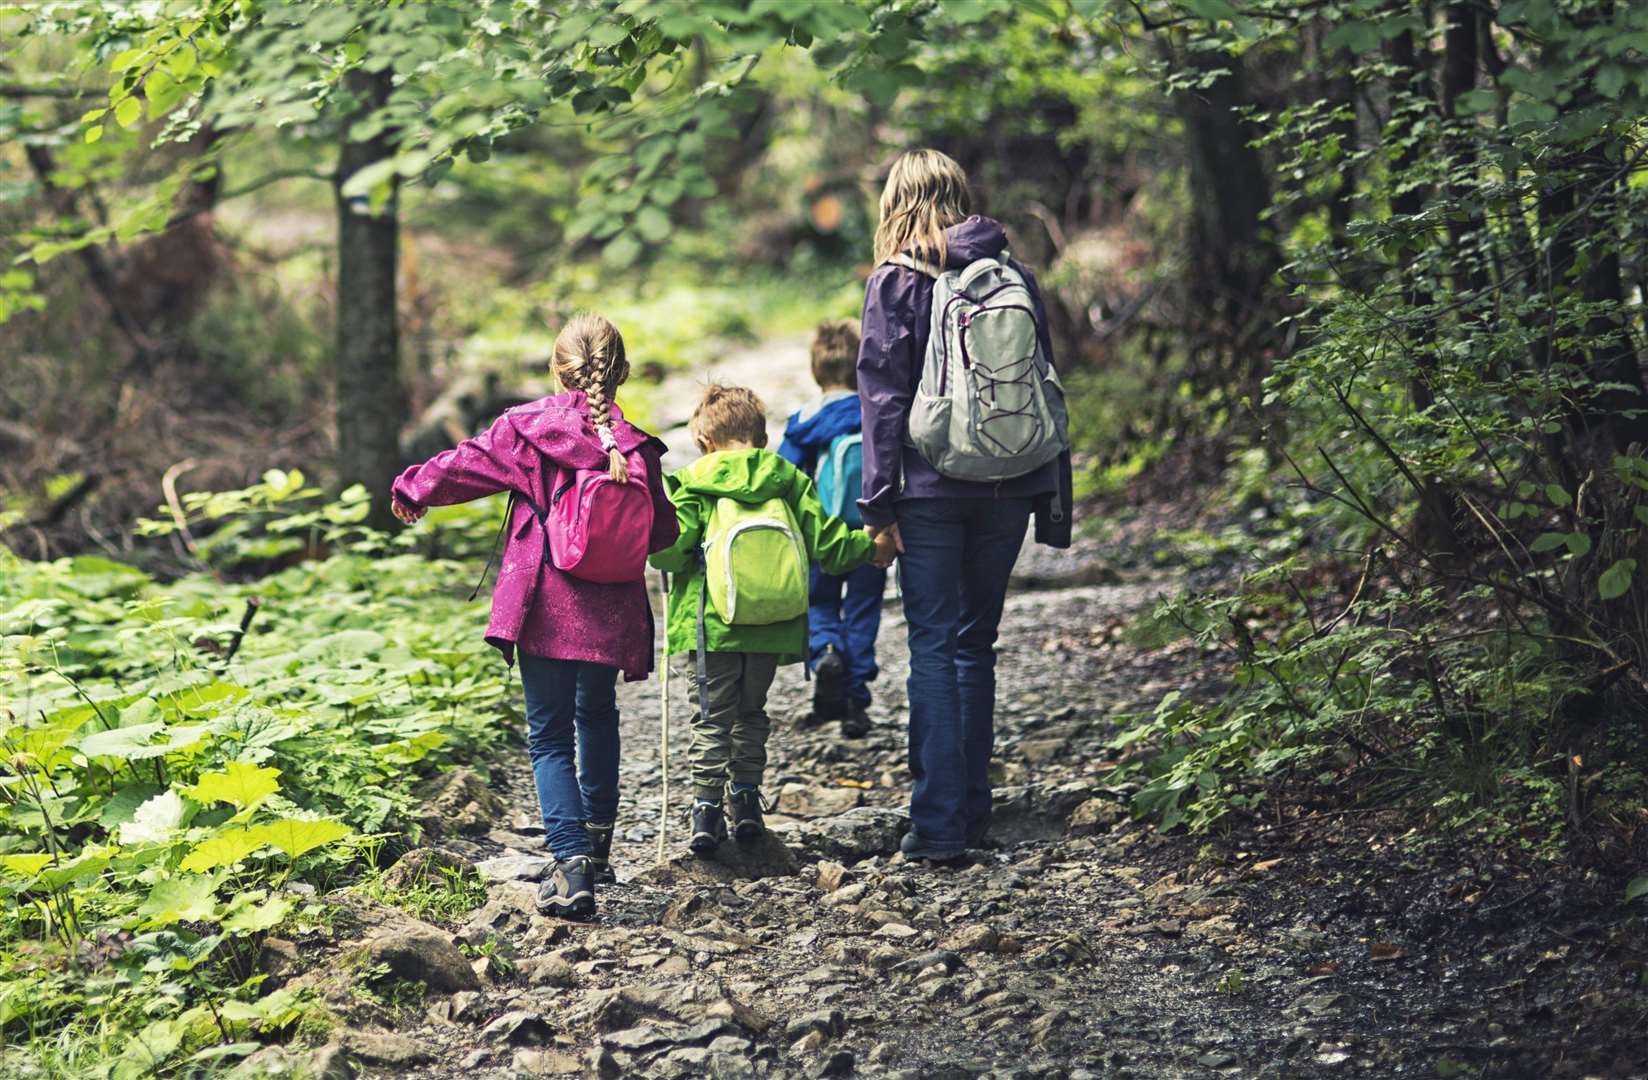 Taking a check list of things to find can make children walk more willingly